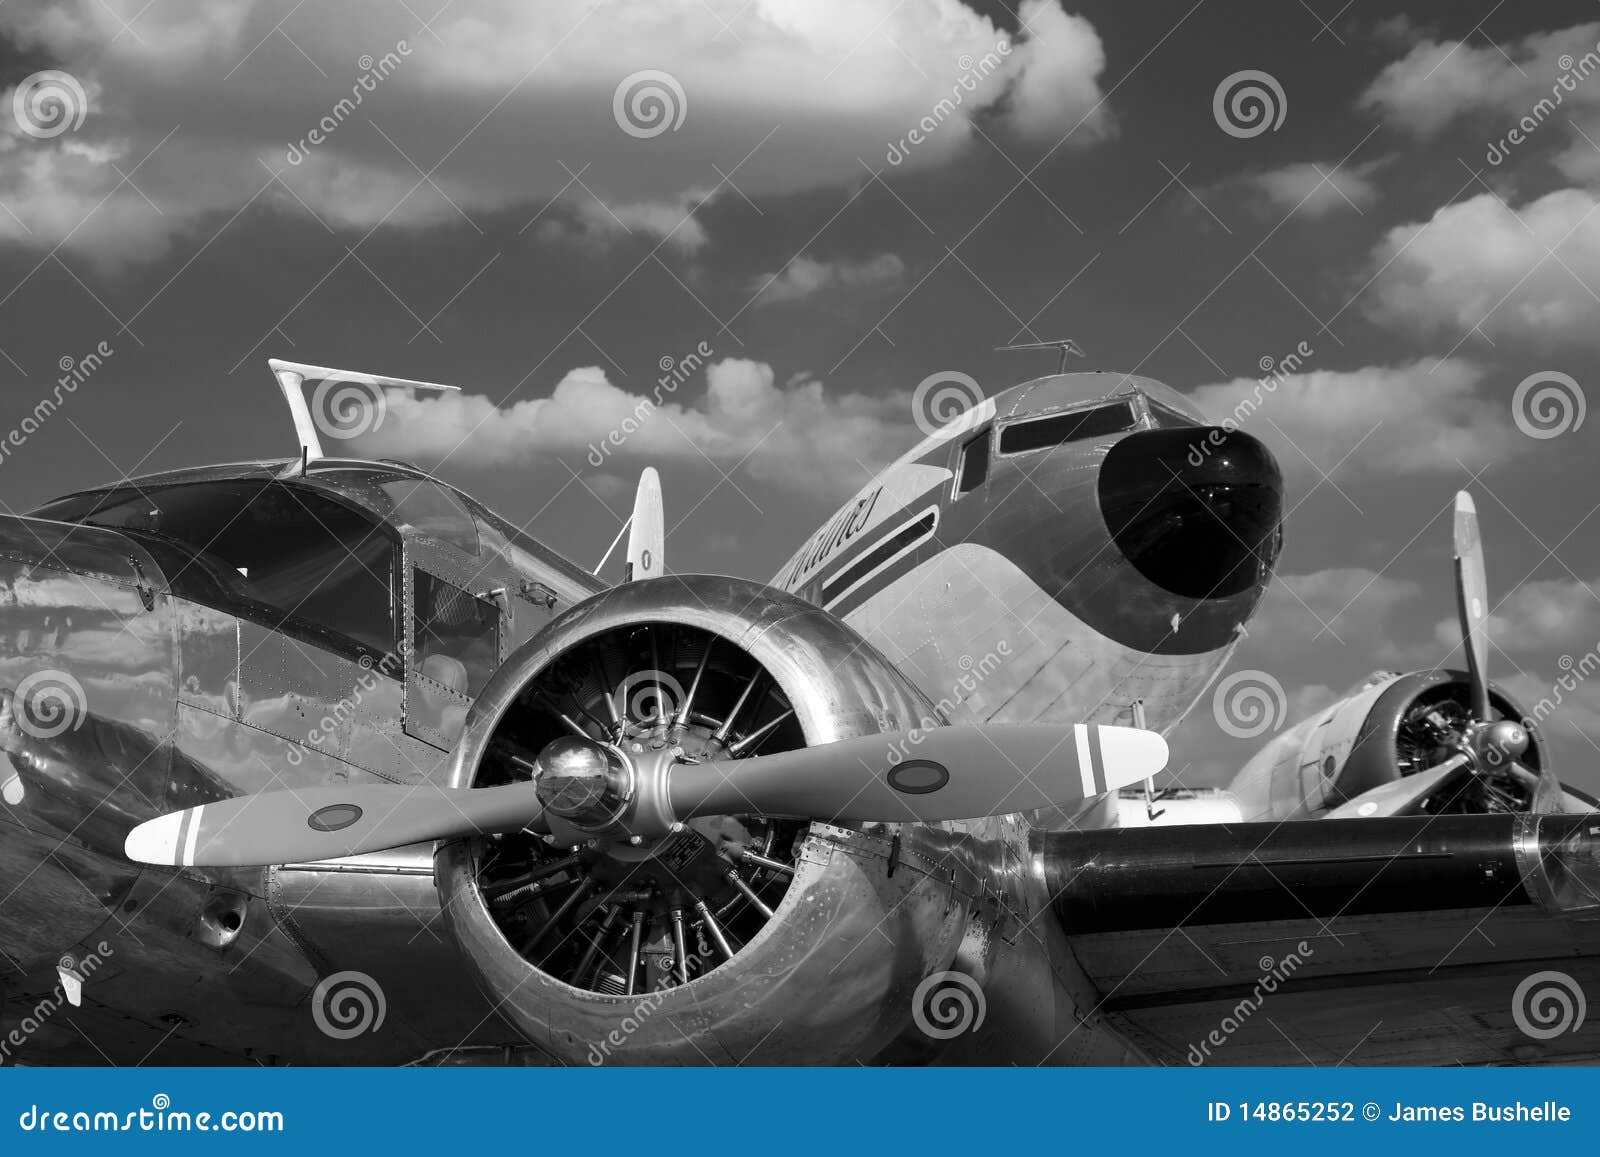 vintage airplanes in black and white